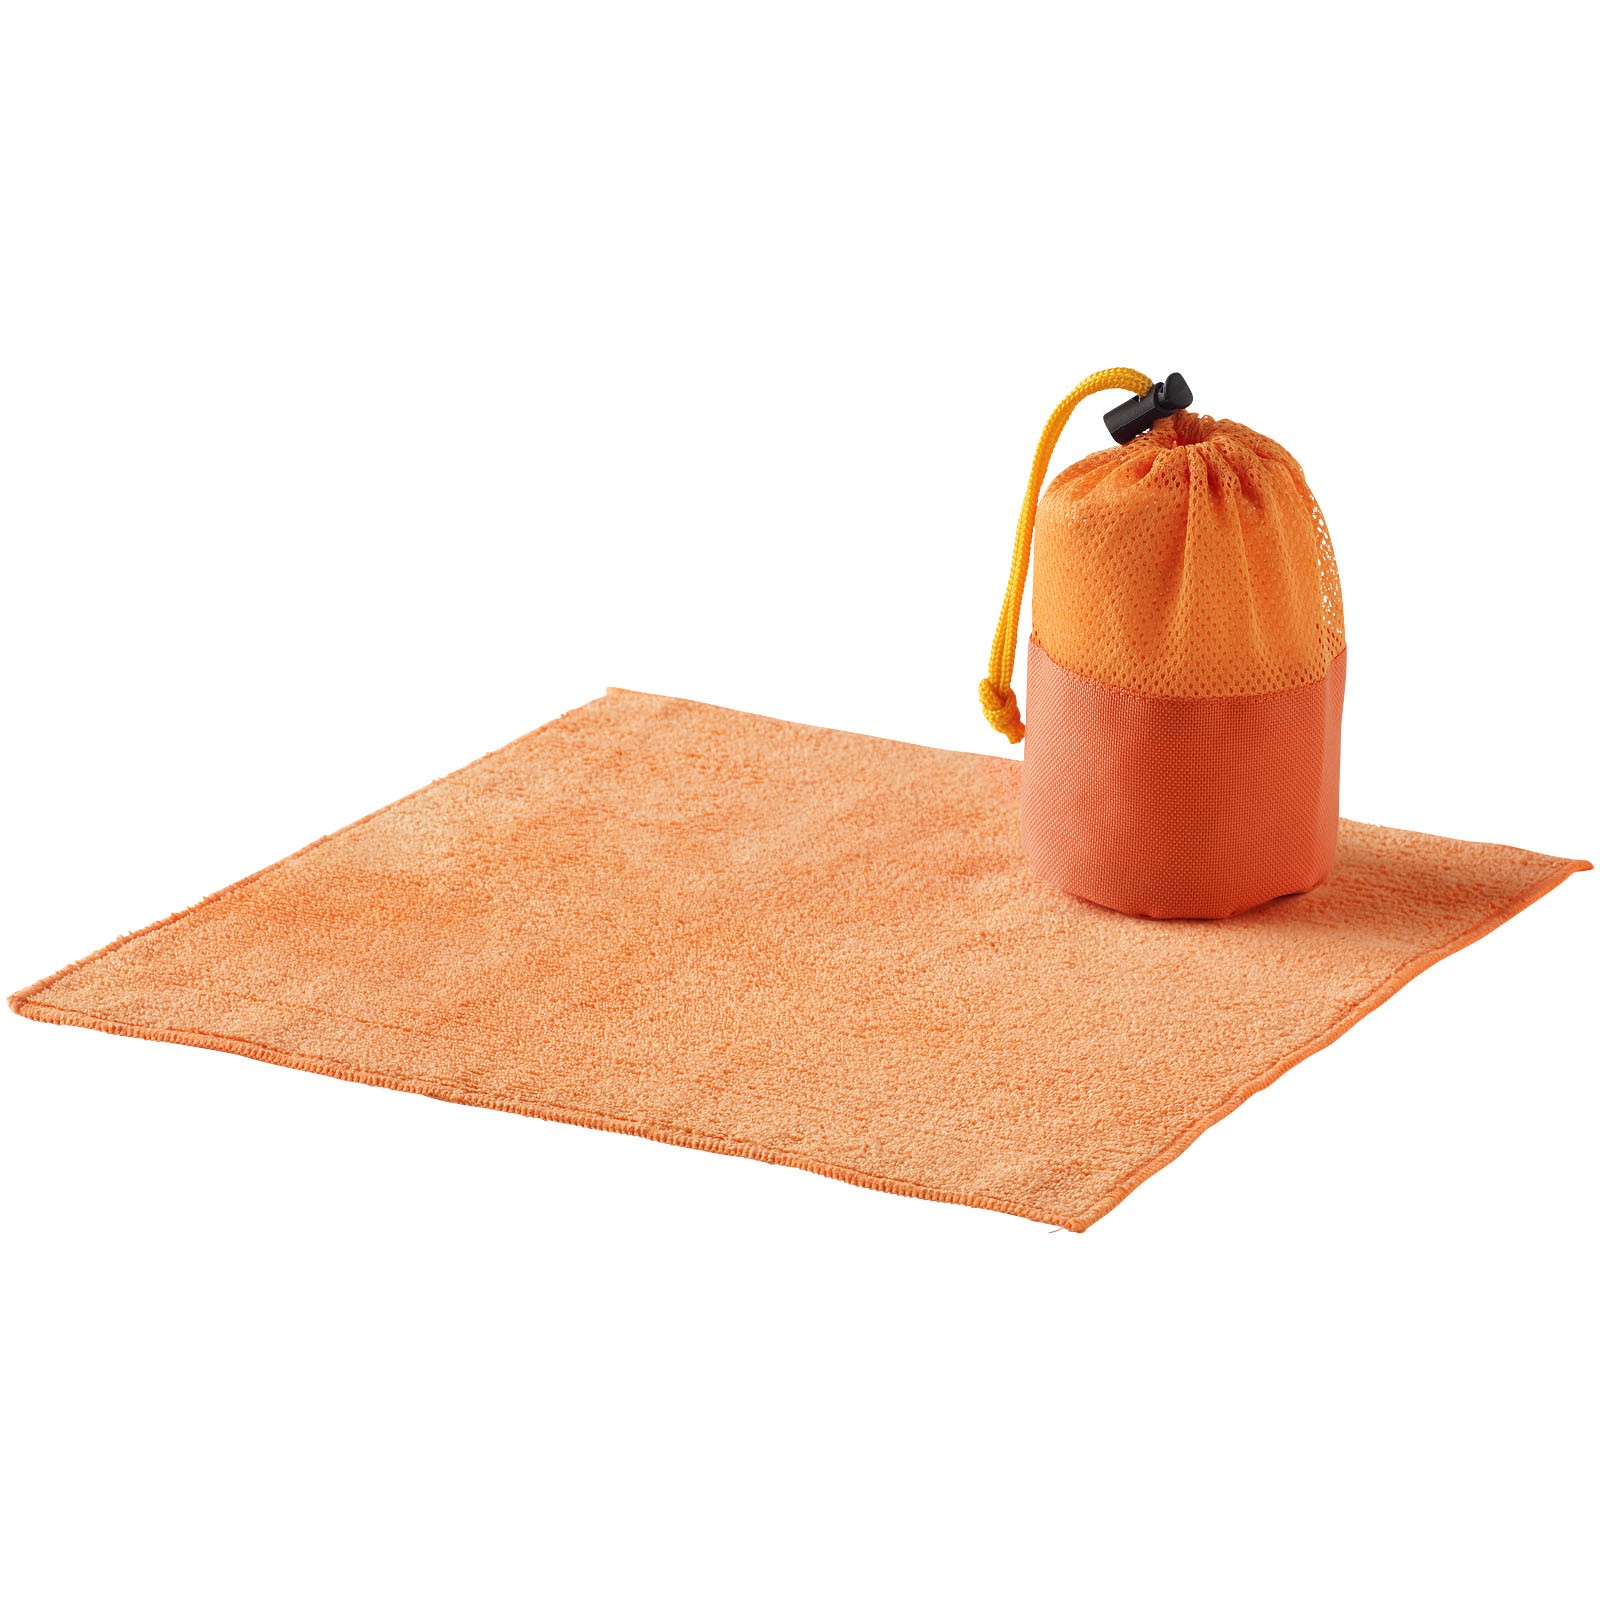 Diamond car cleaning towel and pouch - Orange